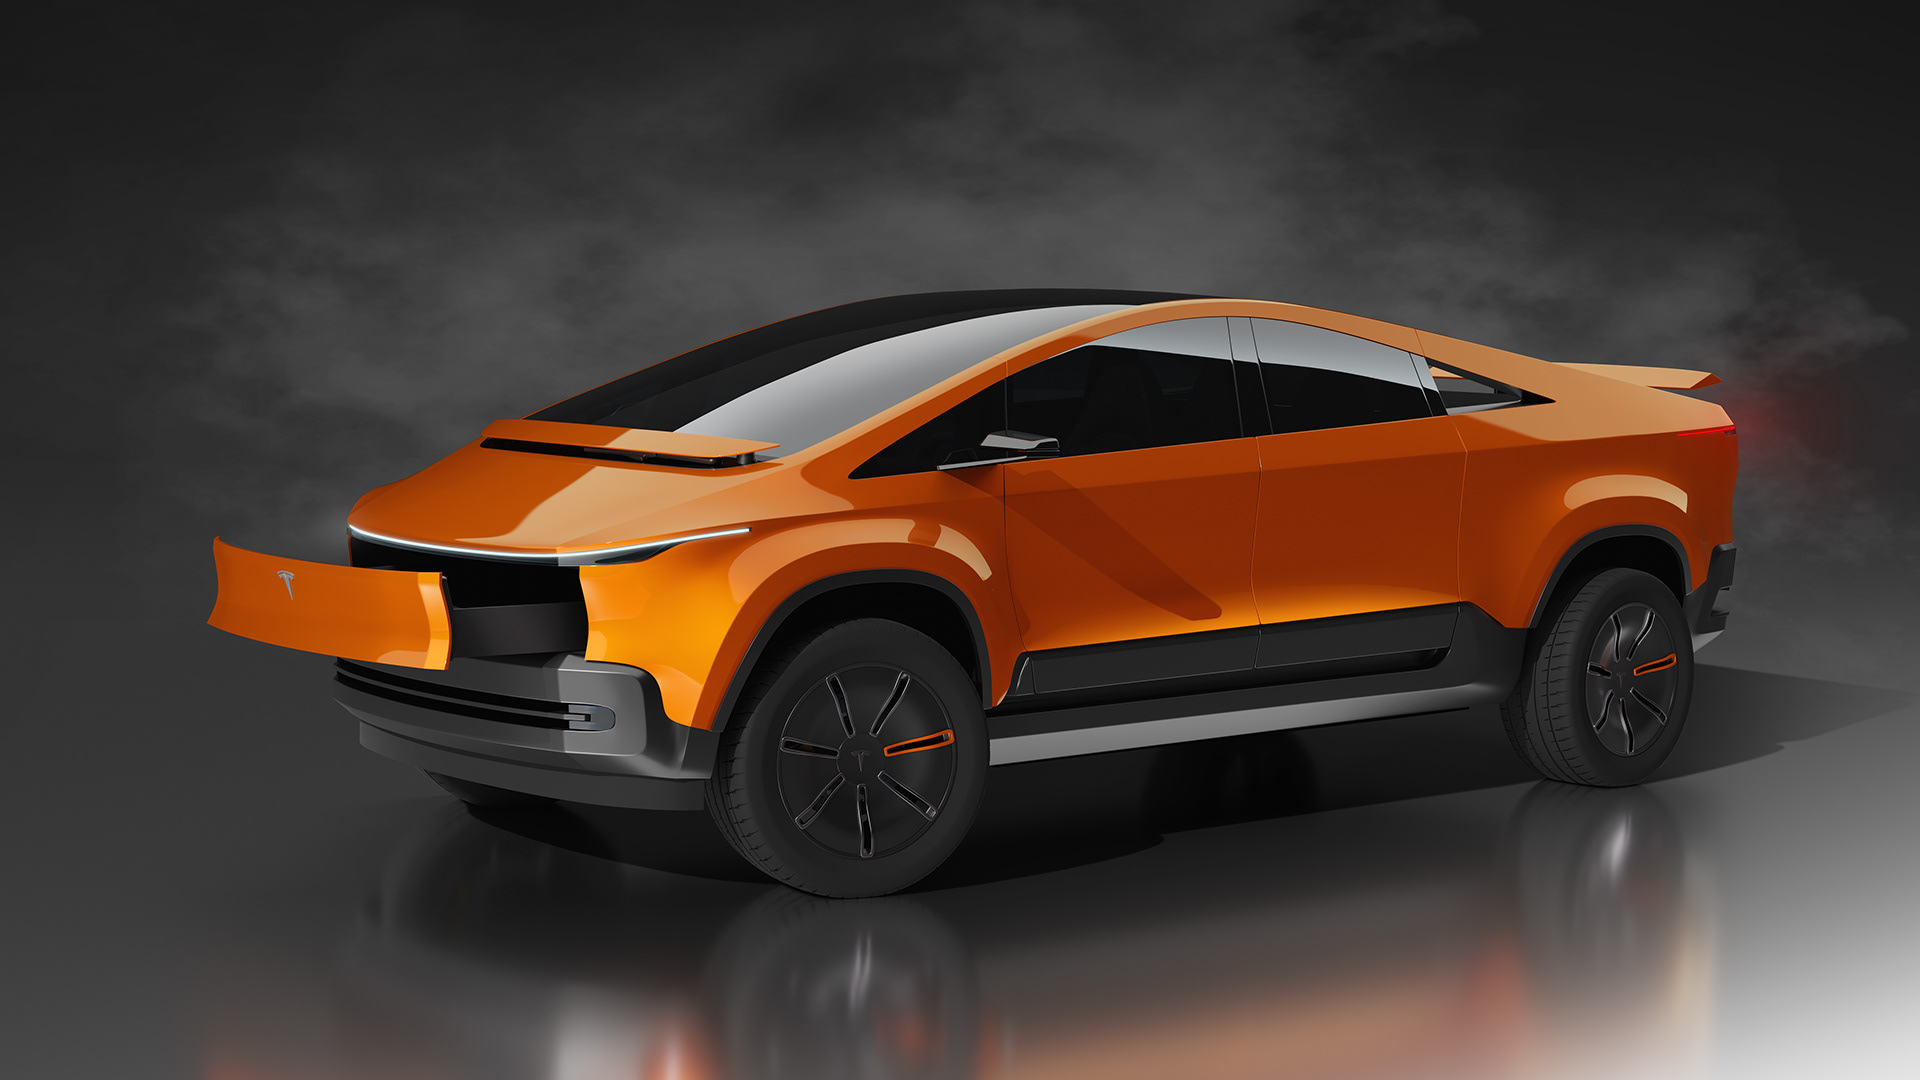 Sleek Tesla Cybertruck Redesign Morphs the Edgy Pickup Into a